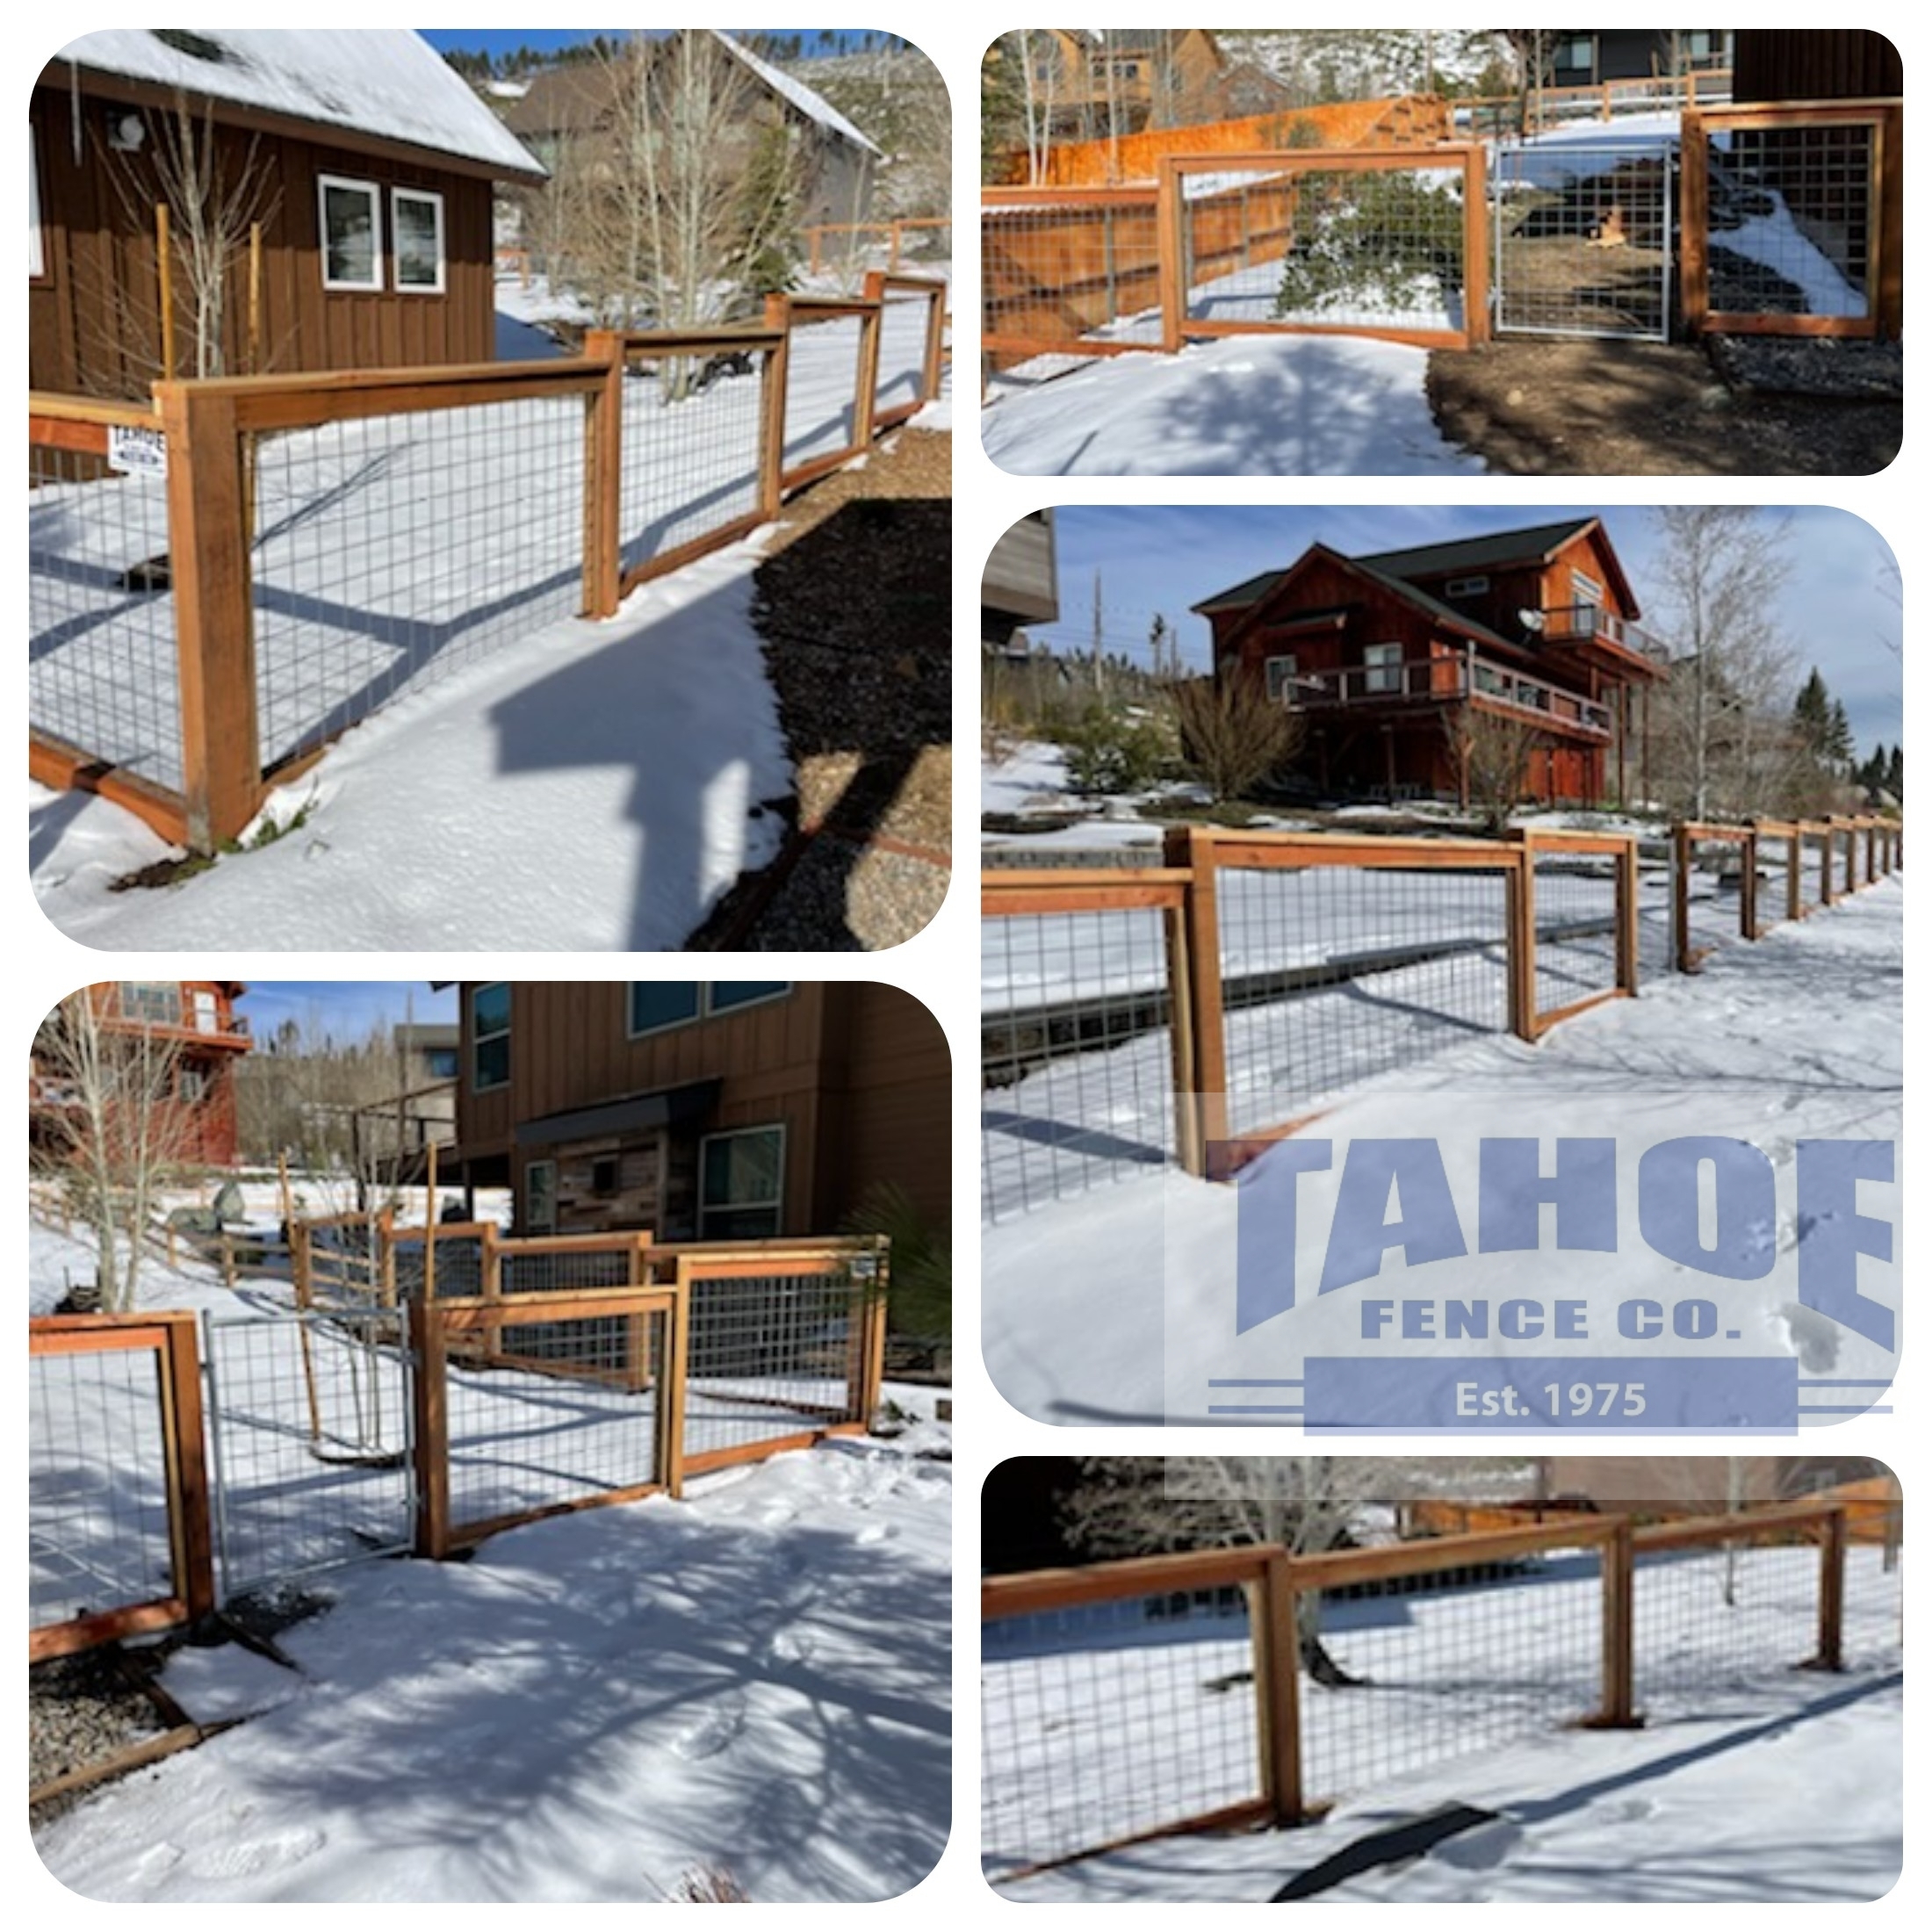 Redwood framed fence with welded wire panel fill in South Lake Tahoe (El Dorado County)